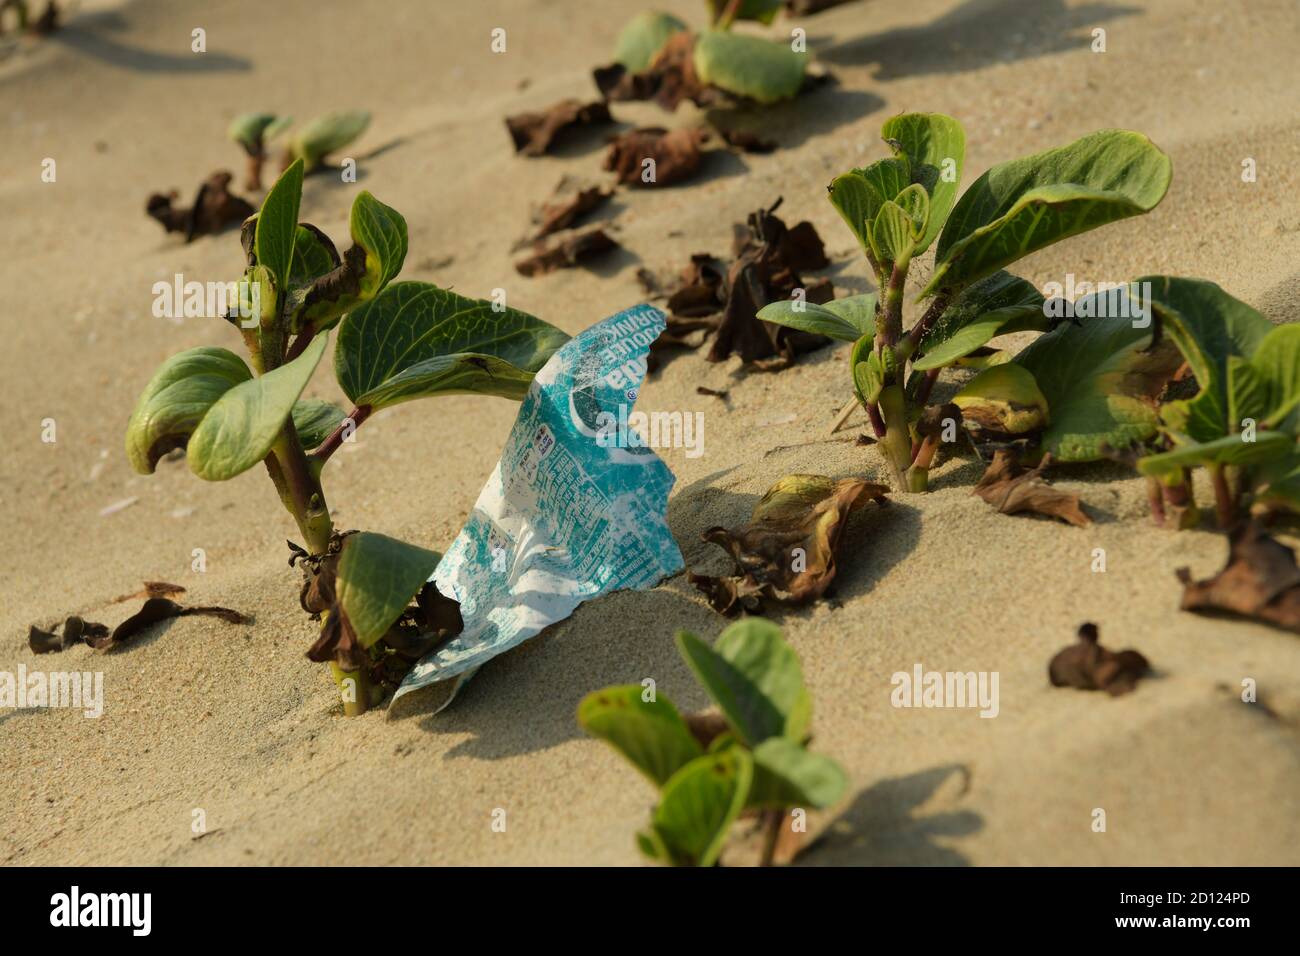 Plastic pollution, food packaging in sand next to plant, South Africa, object, still life, illustration, carbon footprint, recycling, waste, litter Stock Photo